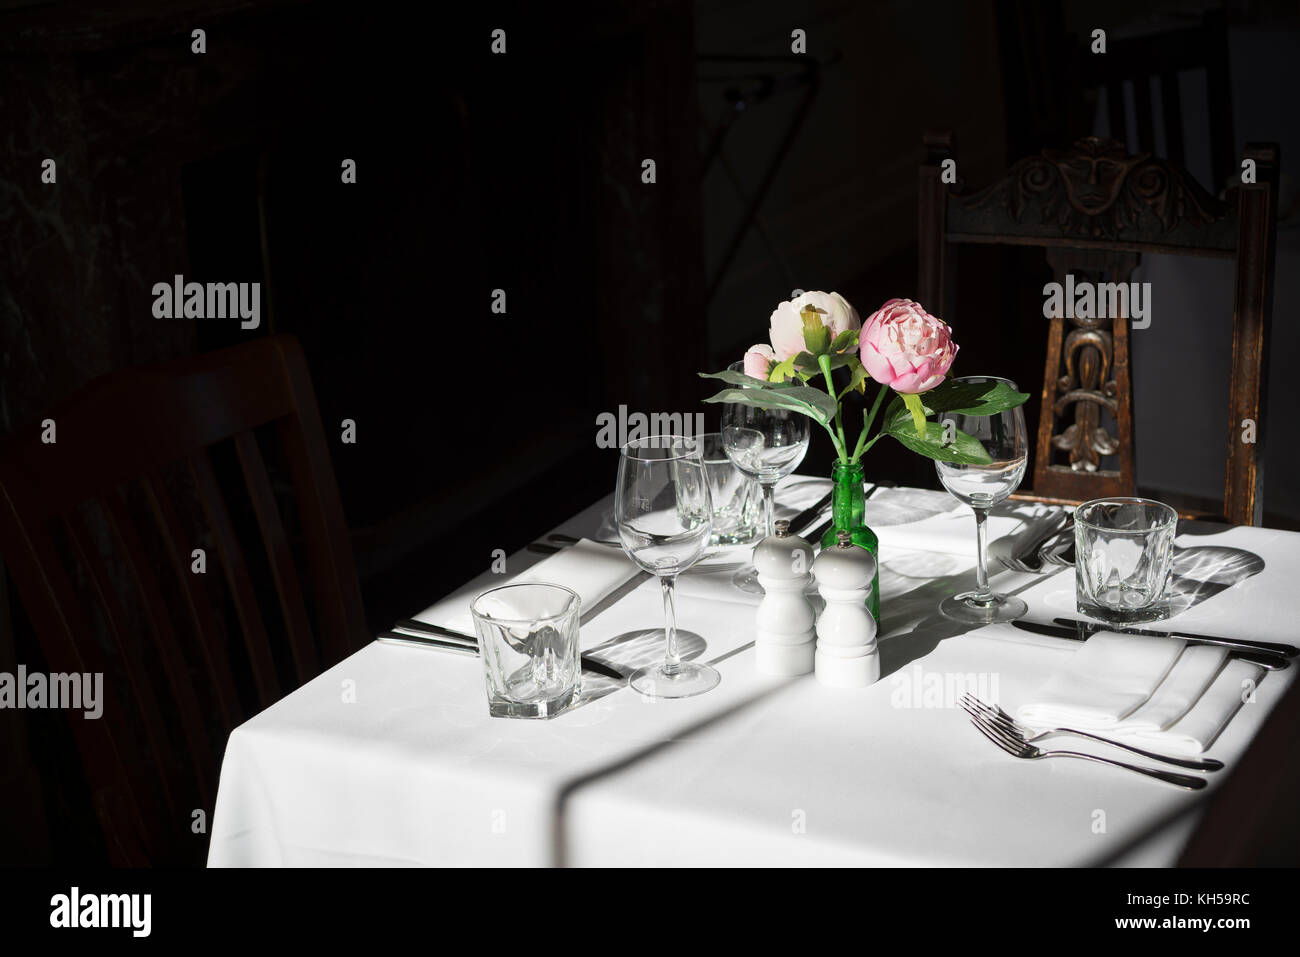 Proud Stanmer House, Brighton. Formal dining place setting with white linen and flowers, bathed in sunlight. Stock Photo